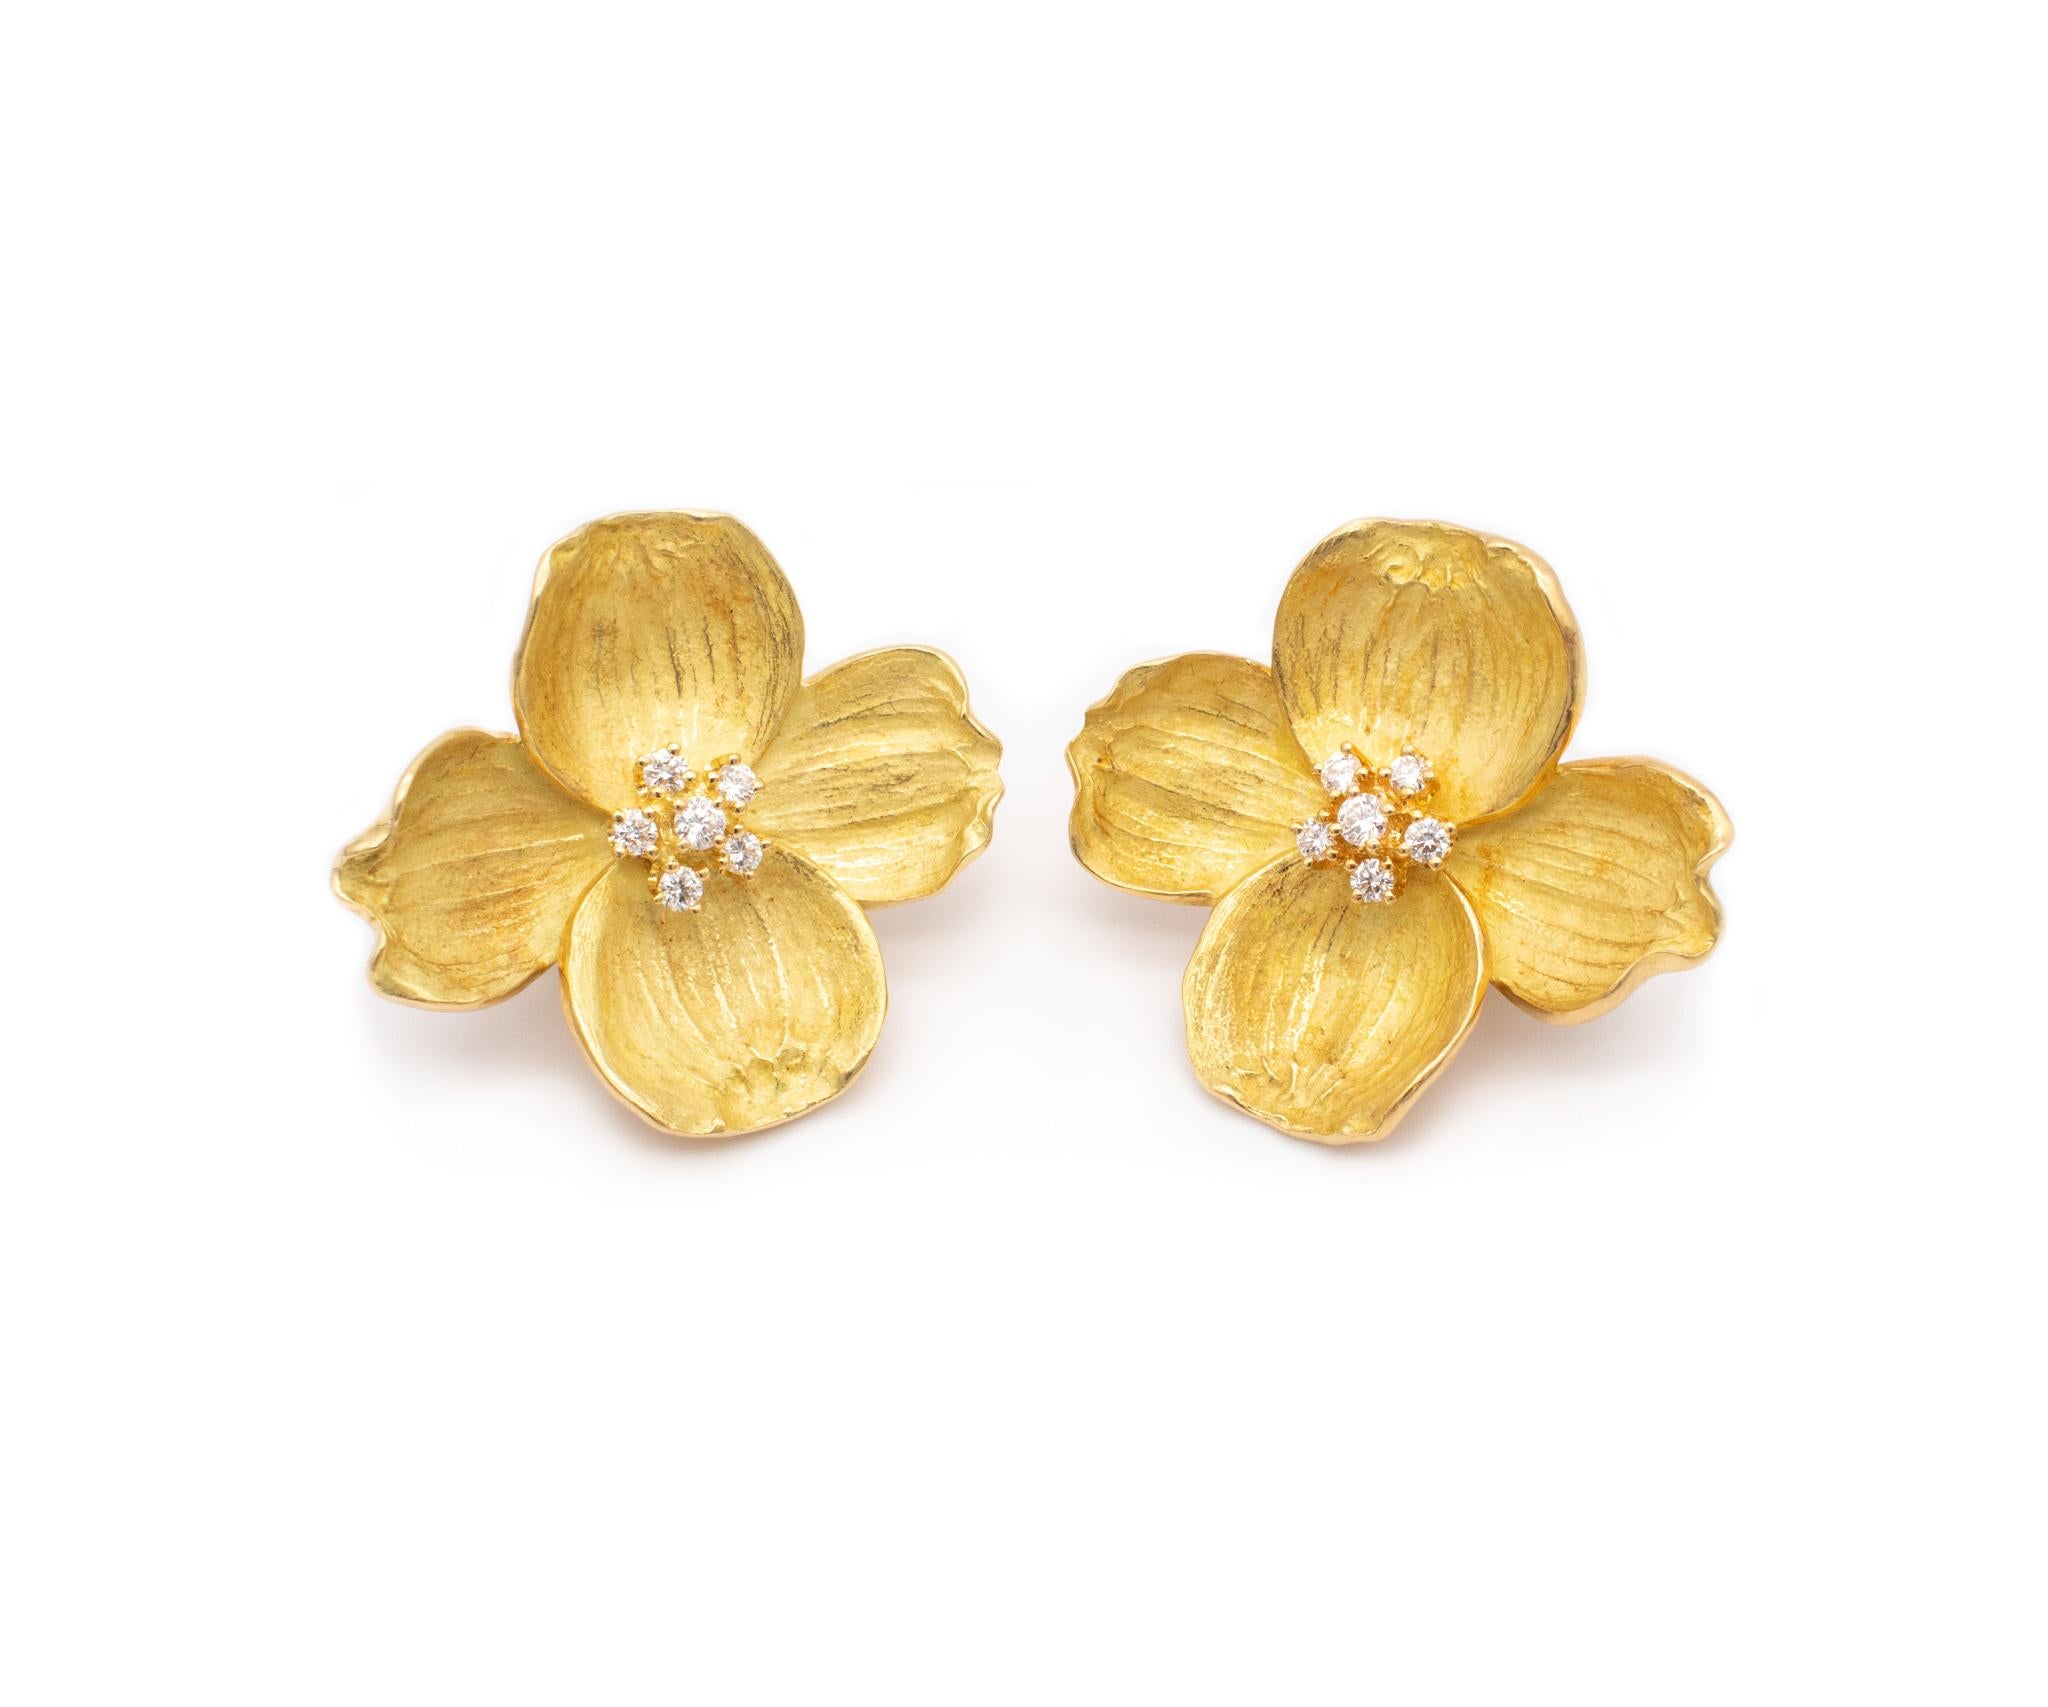 Tiffany Co Dogwood Flowers Extra Large Earrings In 18Kt Yellow Gold VS Diamonds 1